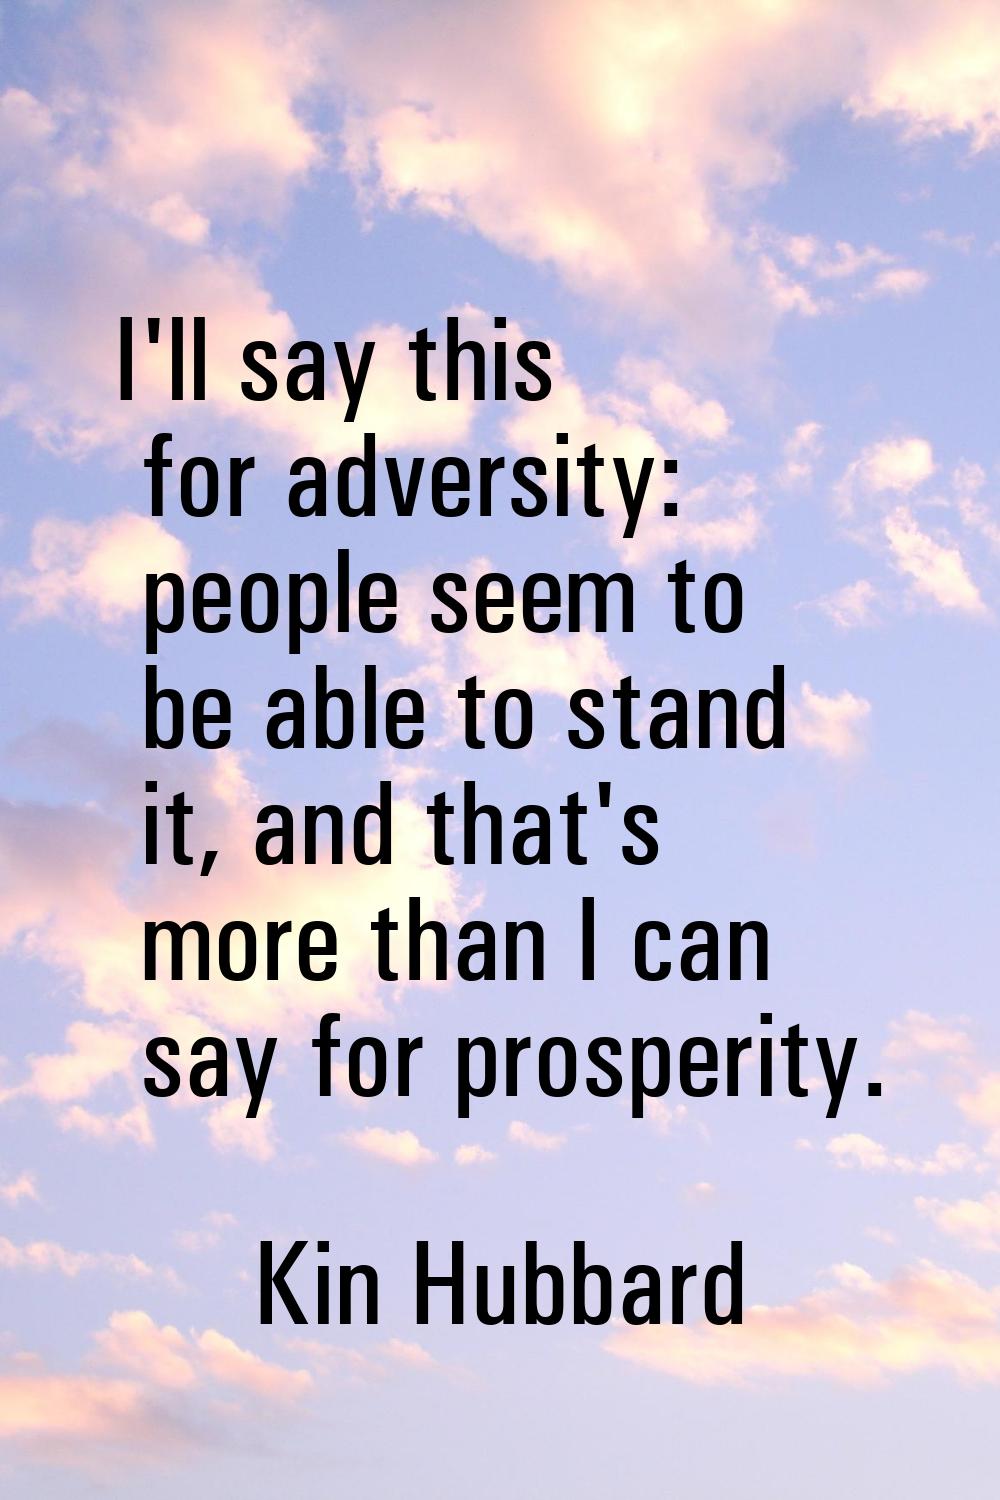 I'll say this for adversity: people seem to be able to stand it, and that's more than I can say for